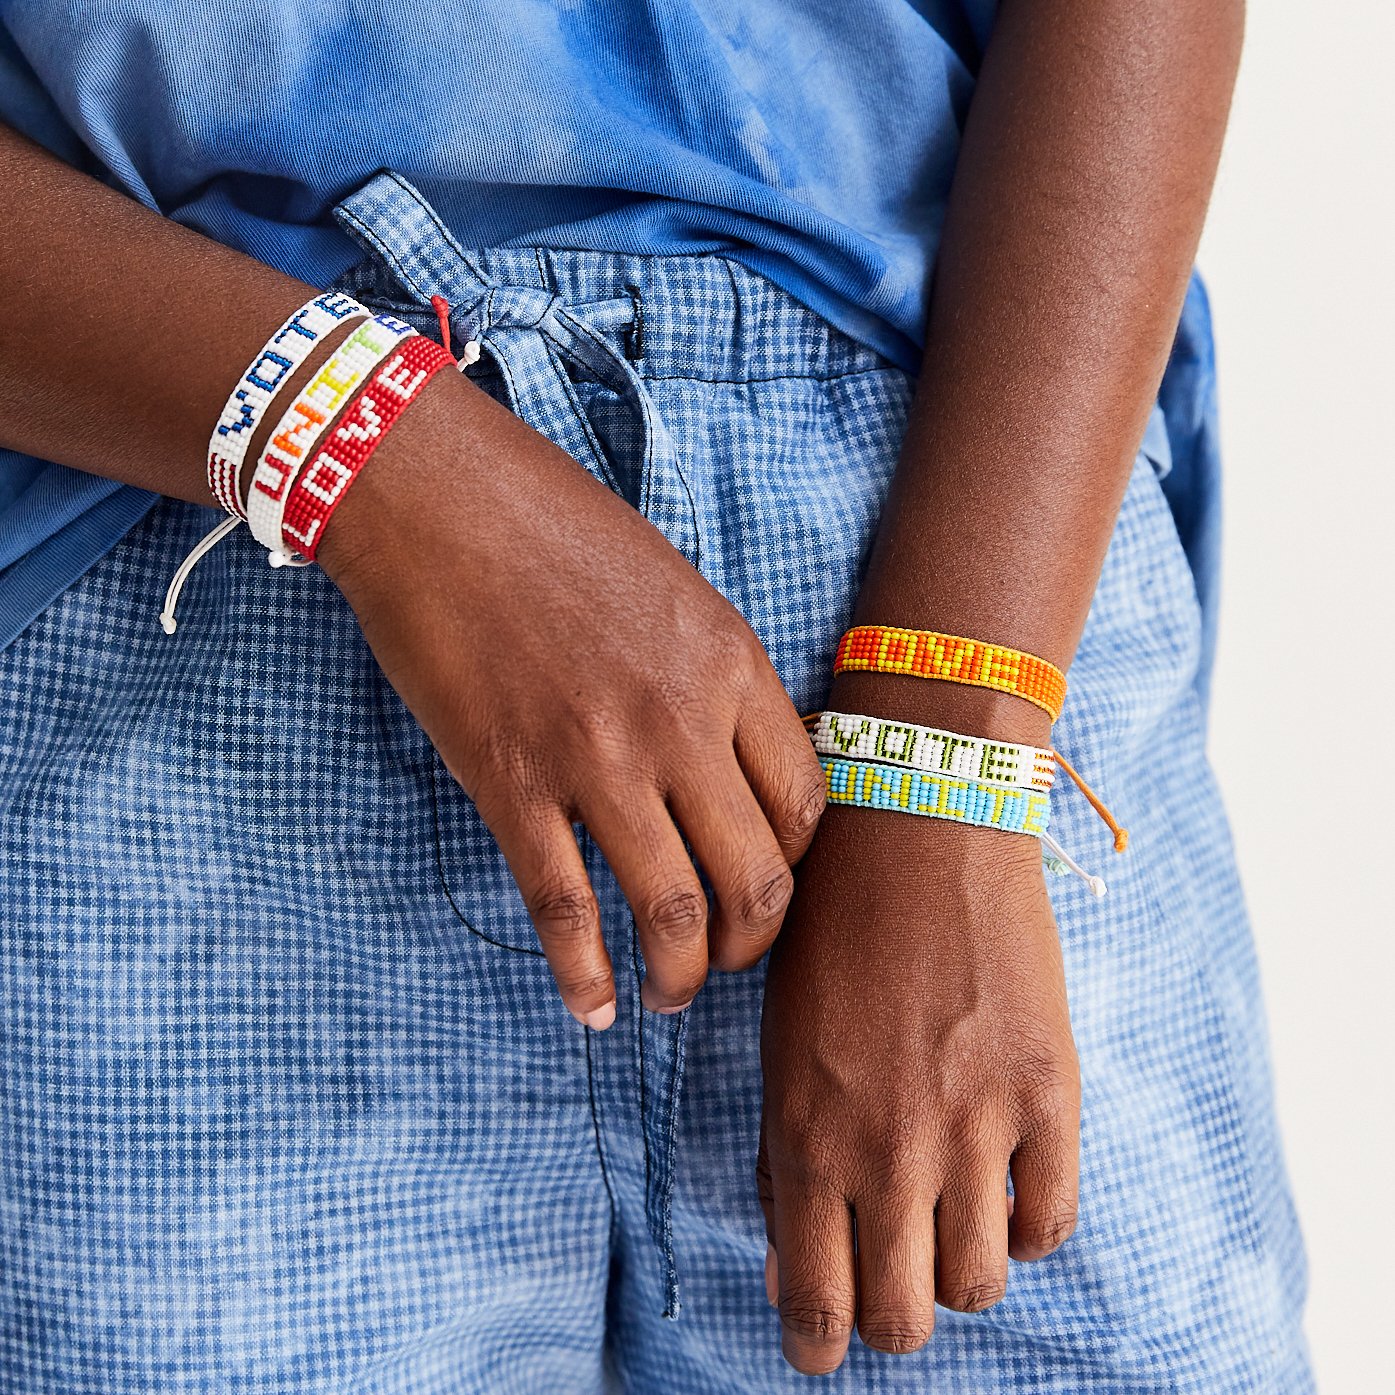 B and E Fave Color Collection: Woven Loom Bracelet / Adjustable Waterproof  Bracelet – Just Bead It